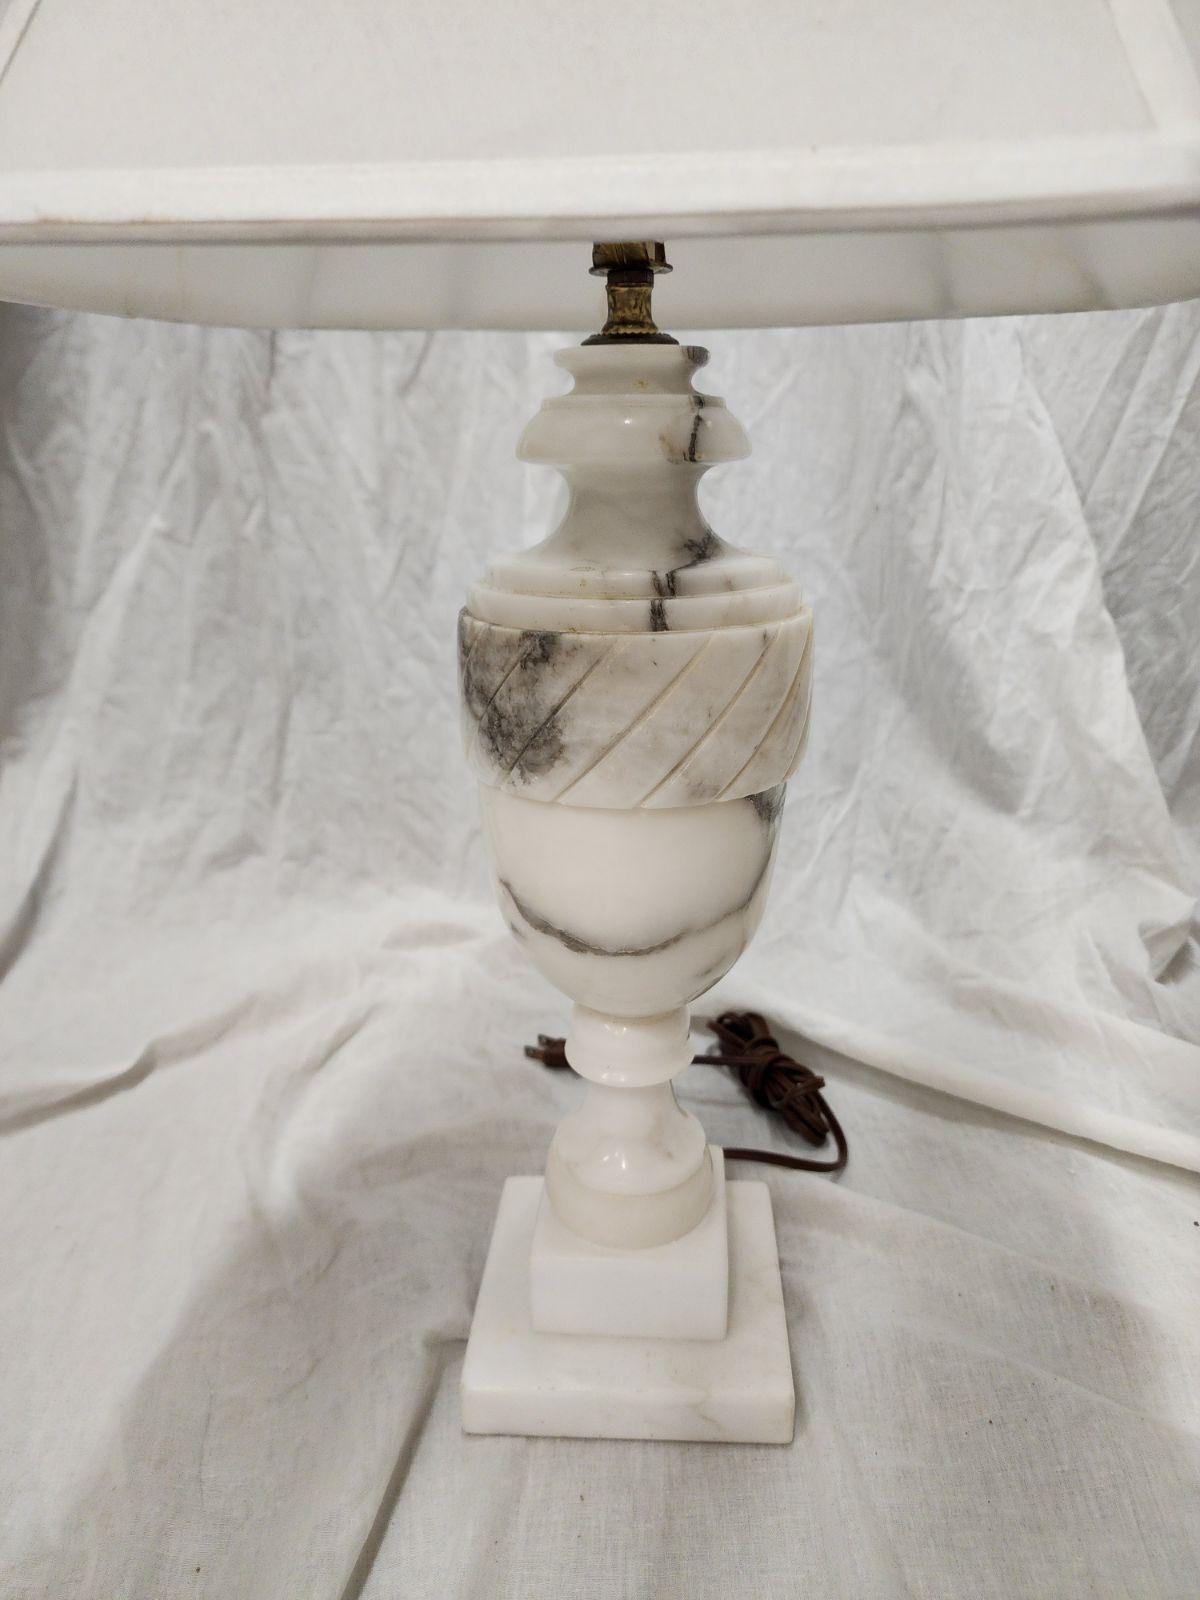 Pair of Marble Table Lamps 1 light, in great conditions, with white and black marble base.
No prior repair. 